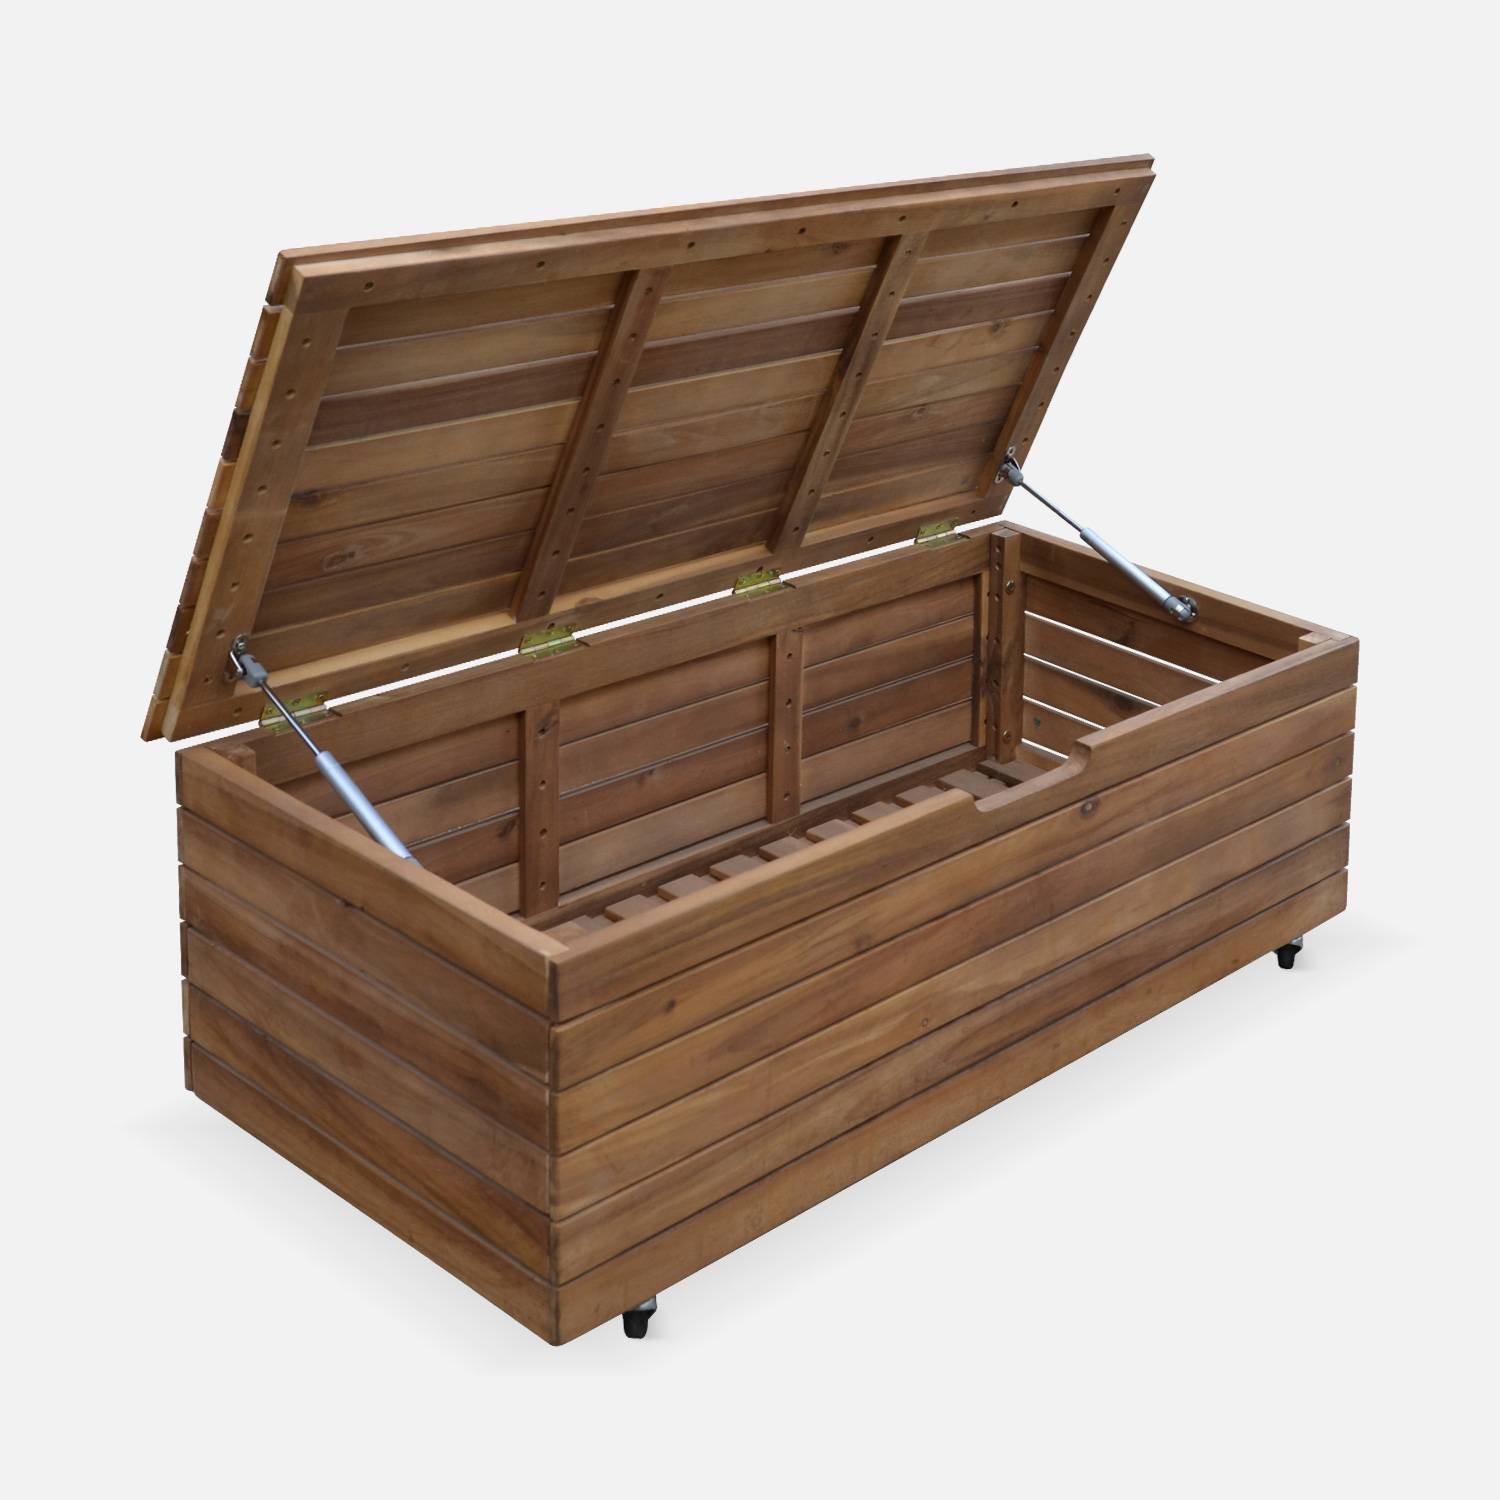 Garden storage box in wood - Saragosse - 110L, cushion storage, 107x48.5cm with hydraulic lift opening and casters,sweeek,Photo5